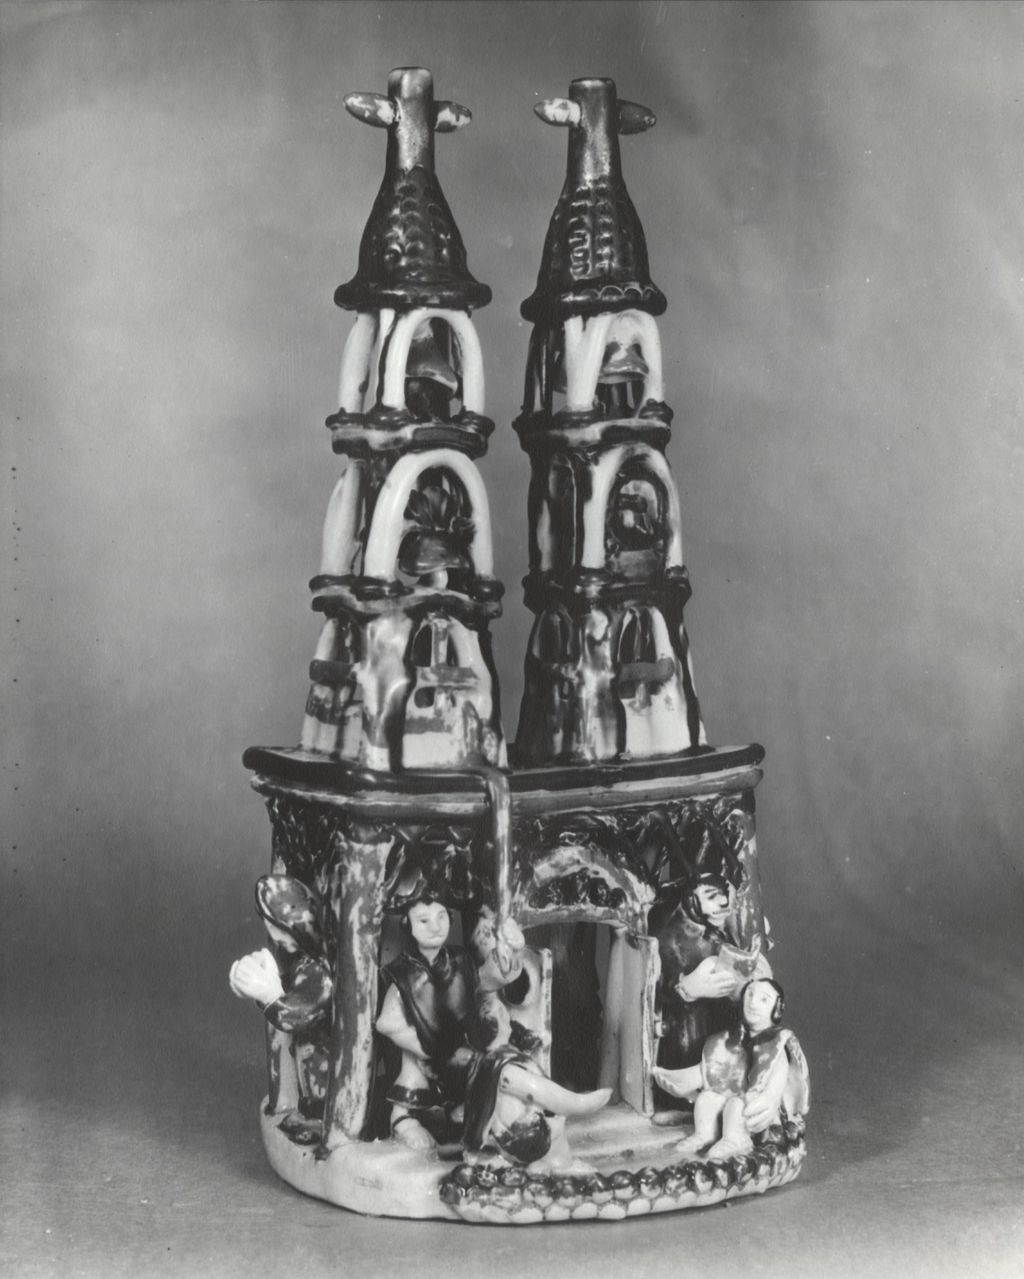 Ceramic sculpture of a cathedral by Miguel Juárez